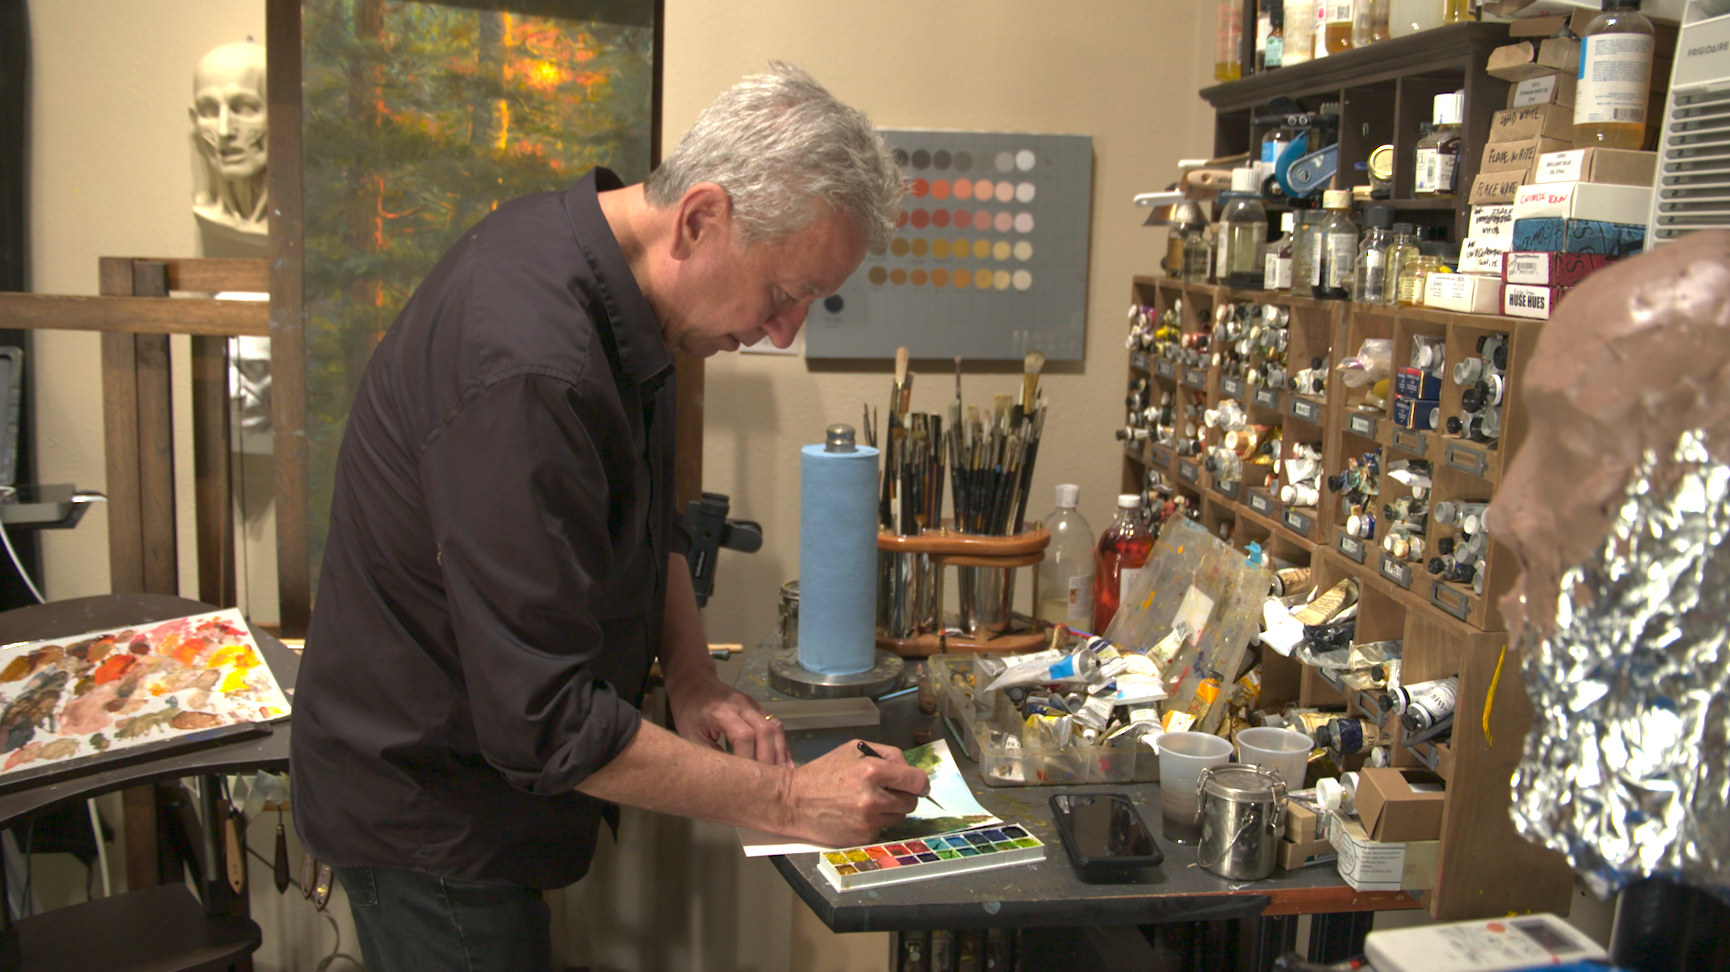 Publisher Eric Rhoads in his art studio; Eric is the host of the annual Plein Air Live online art conference, and much more